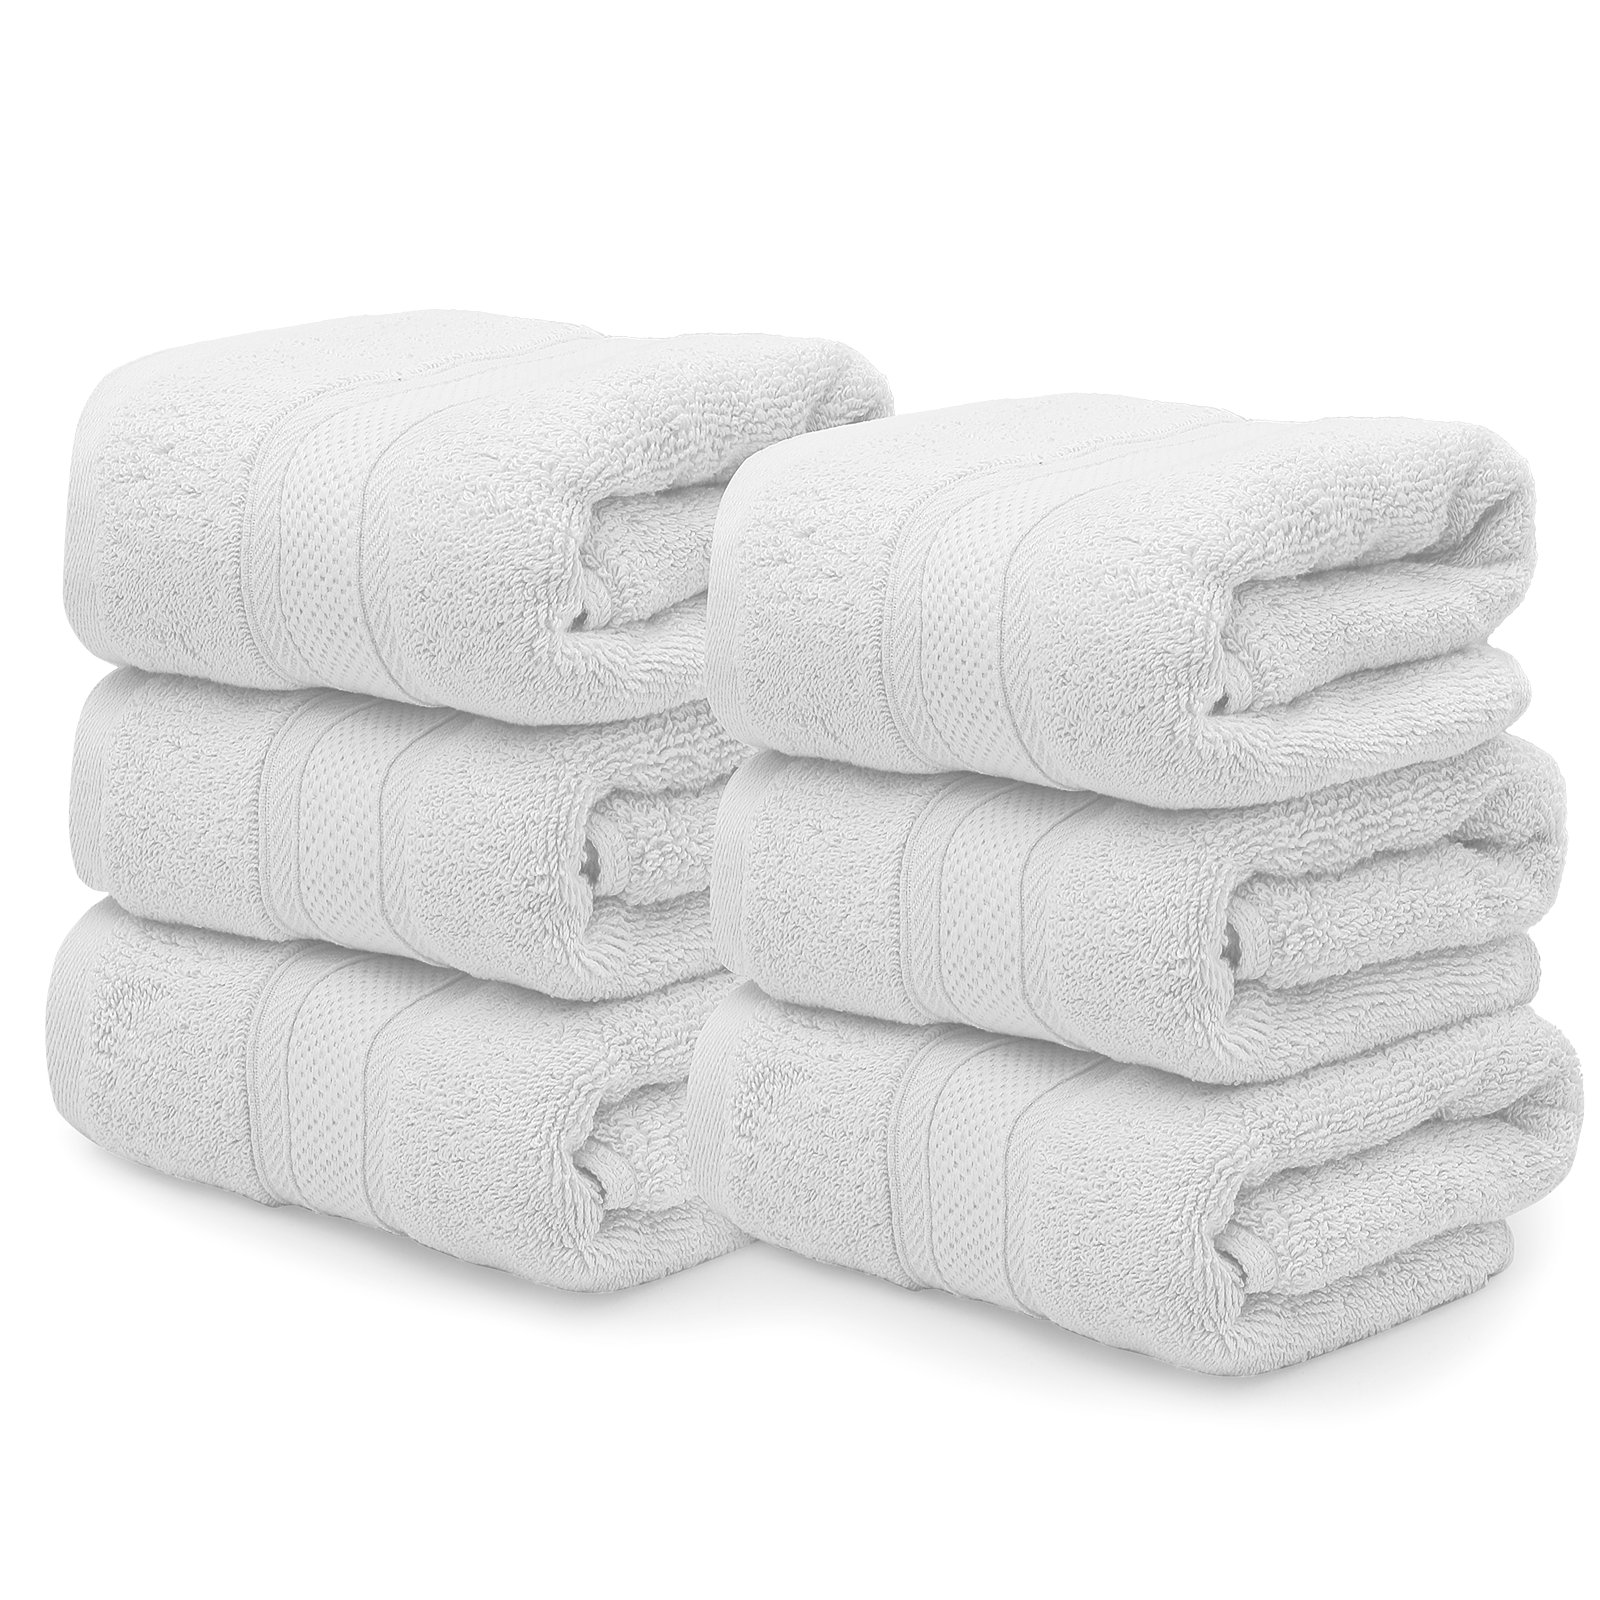 All Design Towels Quick-Dry 4 Pieces White Hand Towels - Highly Absorbent  100% Turkish Cotton - Perfect Towel for Bathroom, Kitchen, Guests, Pool